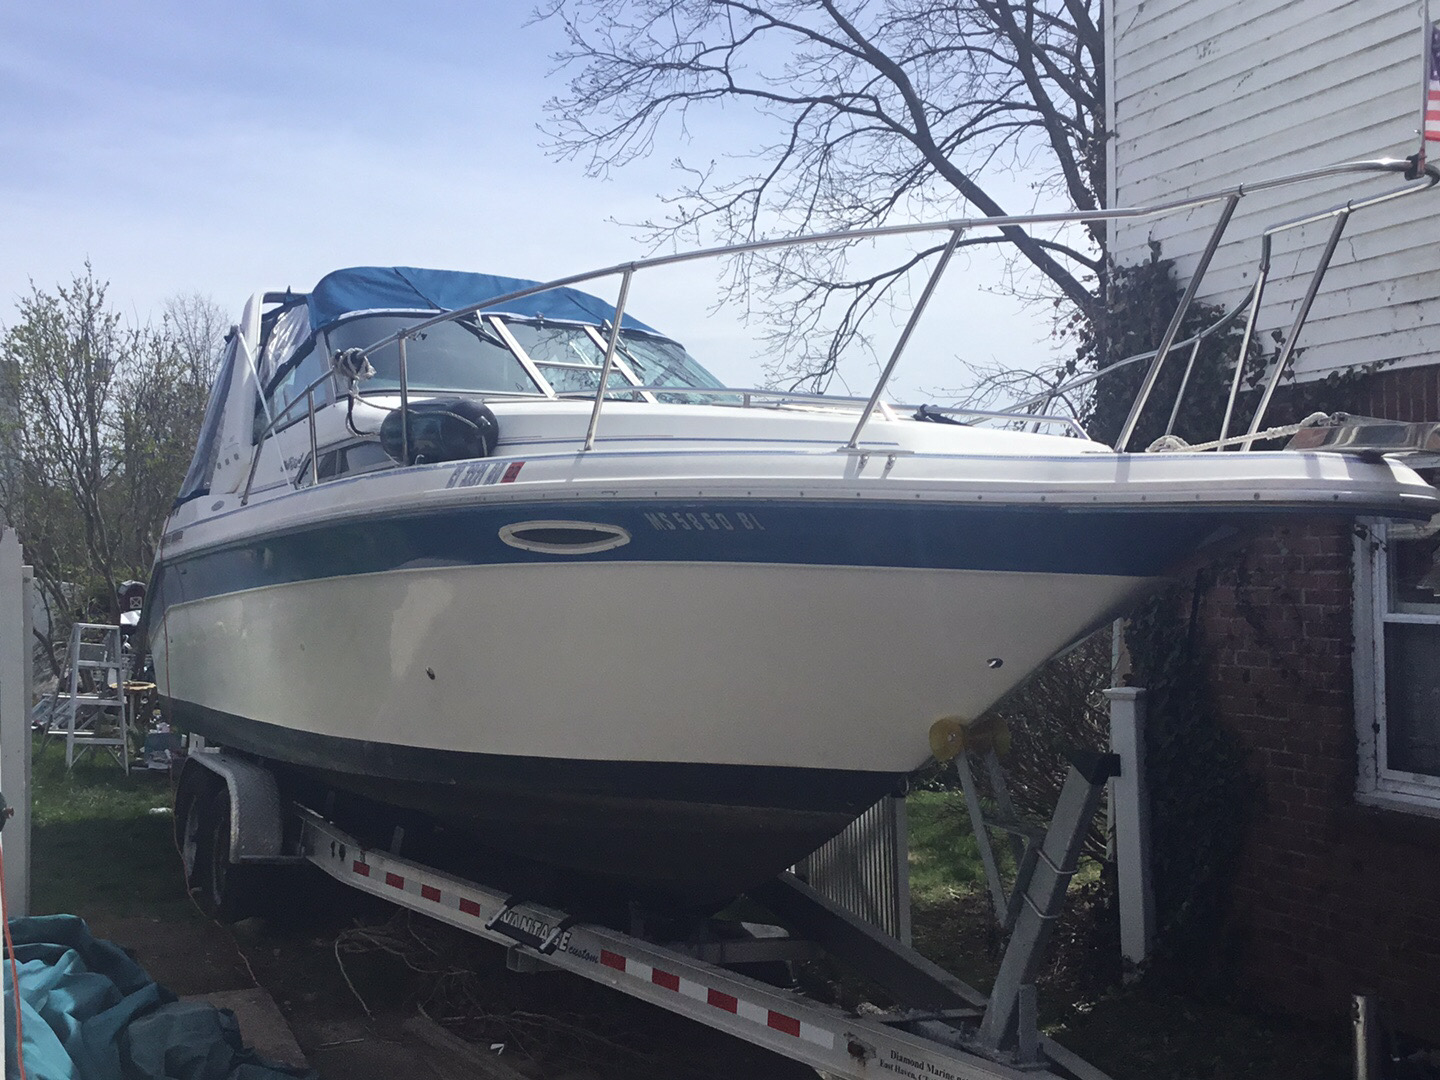 1993 30 foot Sea Ray Cabin CR Power boat for sale in New London, CT - image 3 